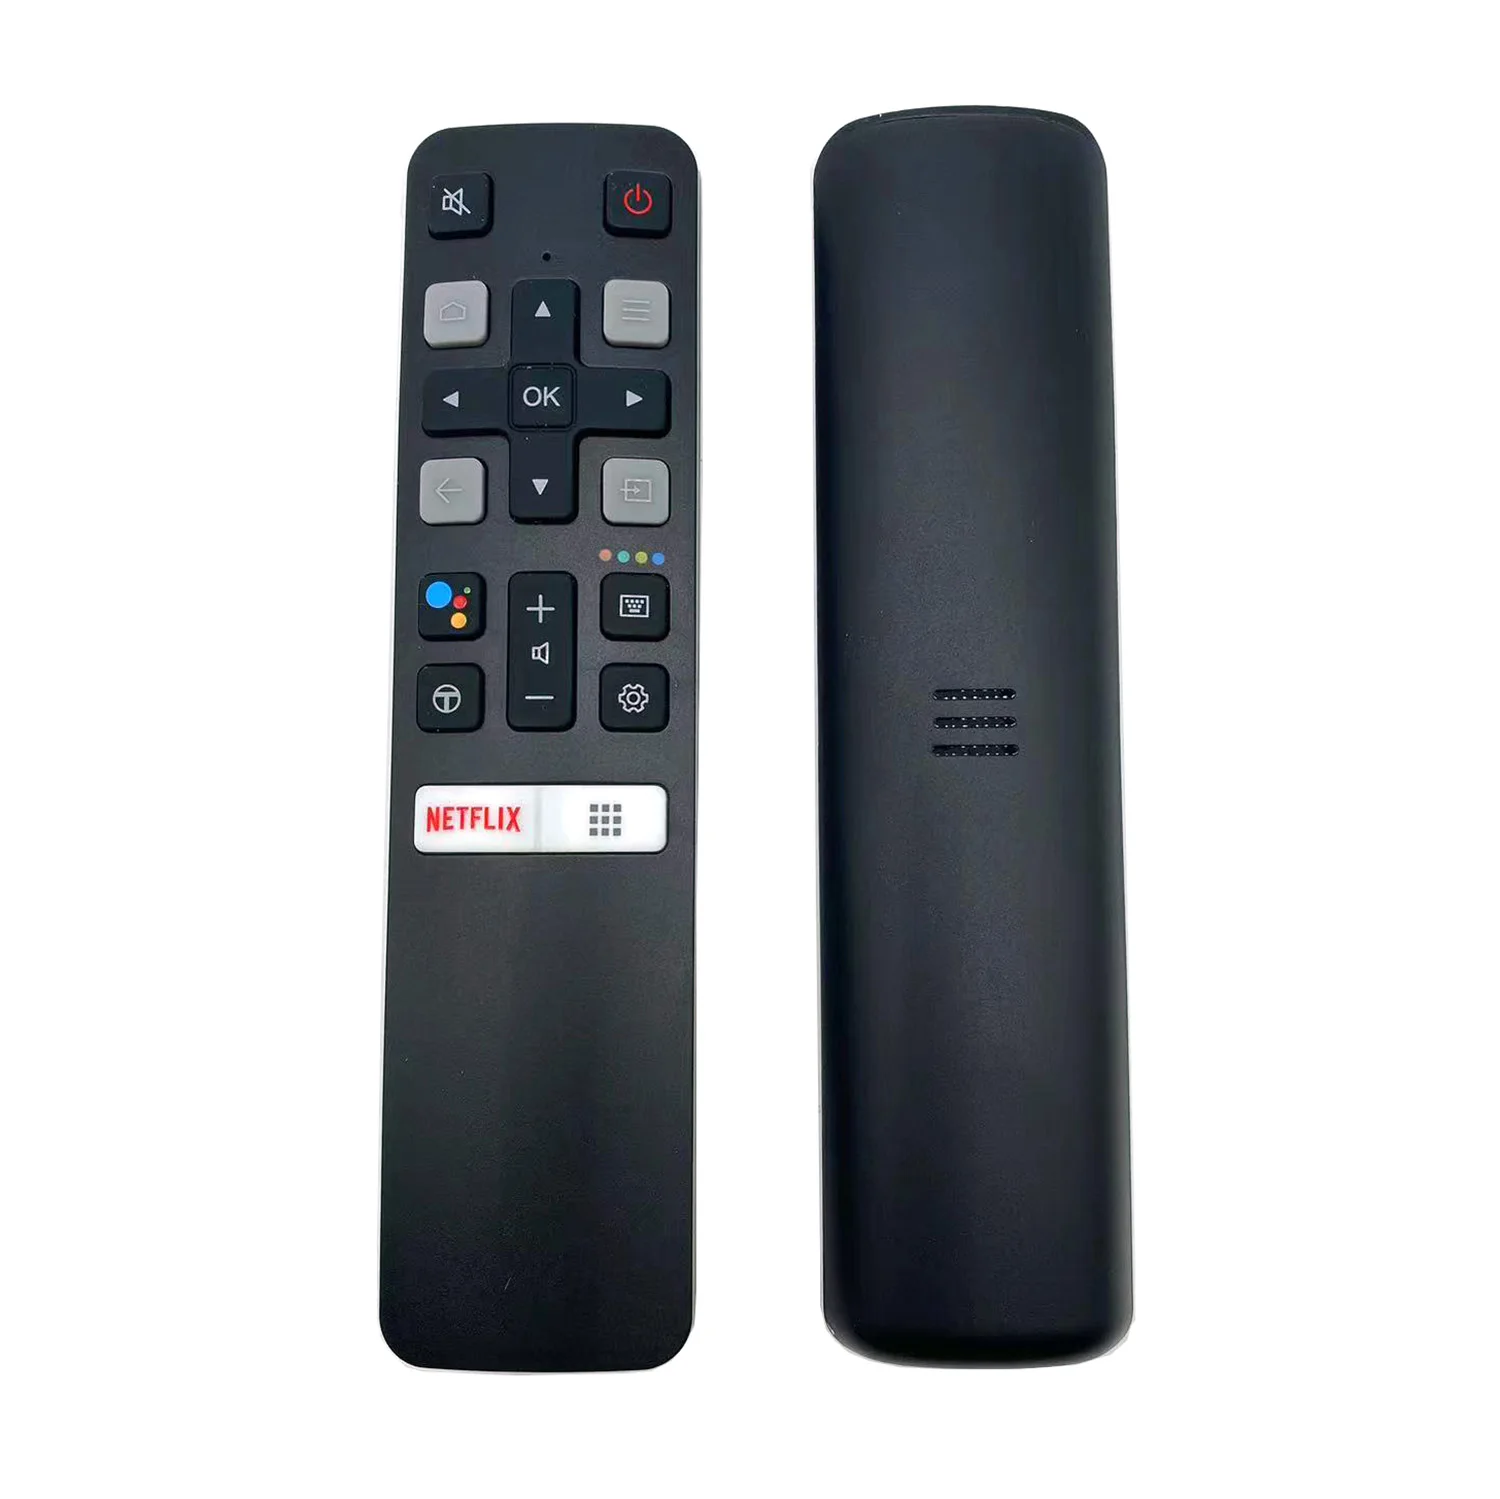 

RC802V FMR1 Voice Remote Control For TCL Android Smart TV 65P8 55P8S 55P8 55EP680 50P8S 50P8 40A325 49S6800 32S6510S 32A325